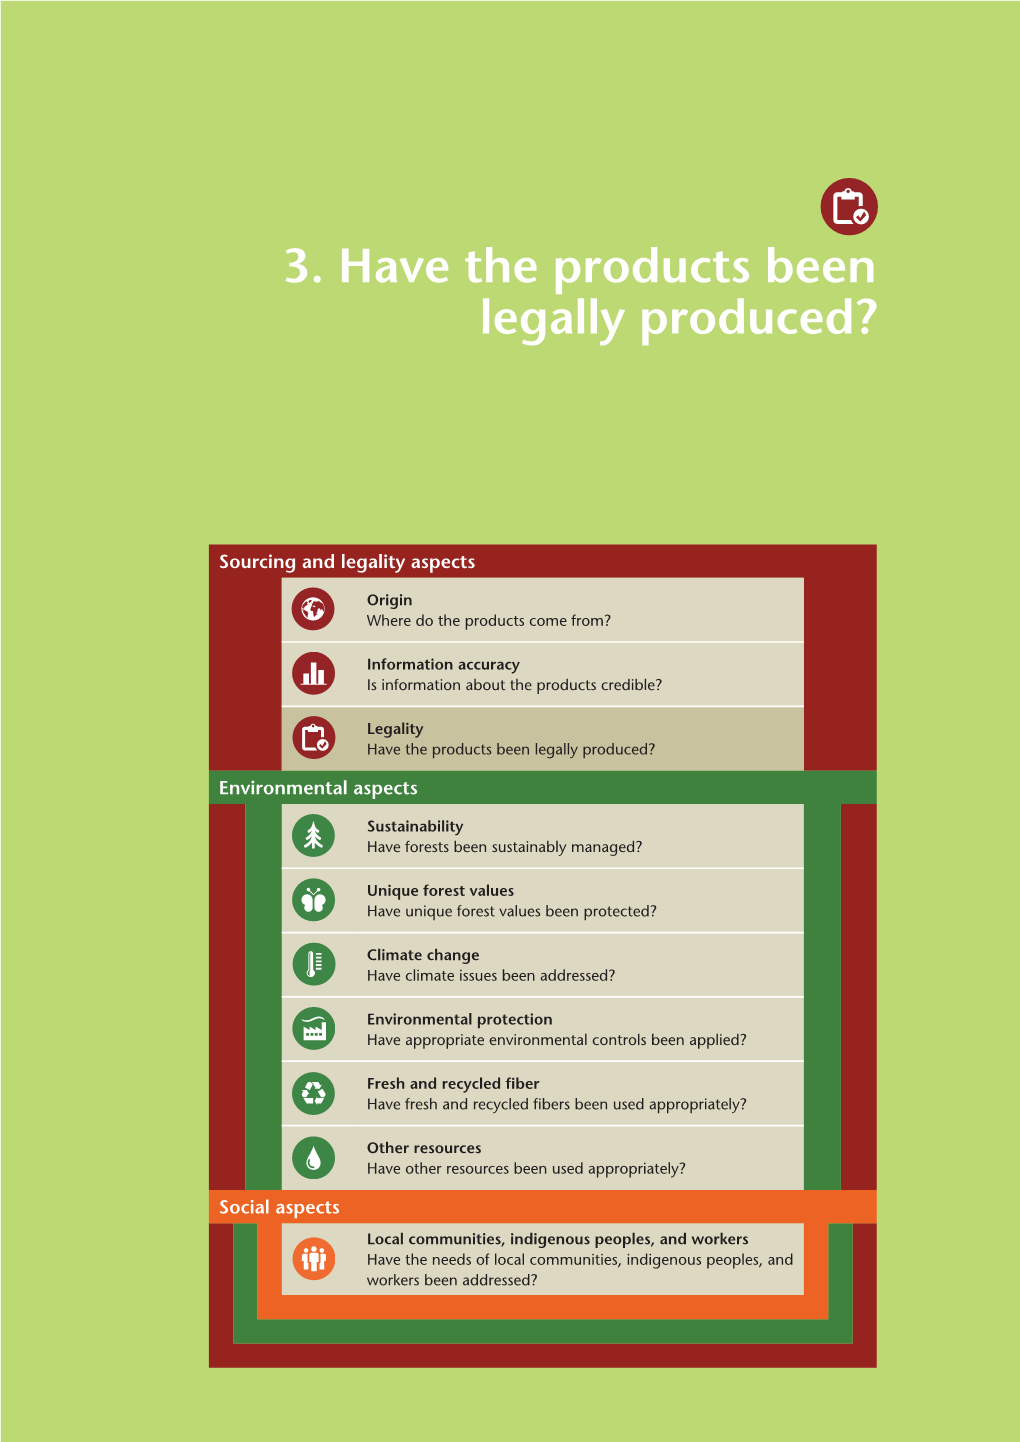 3. Have the Products Been Legally Produced?